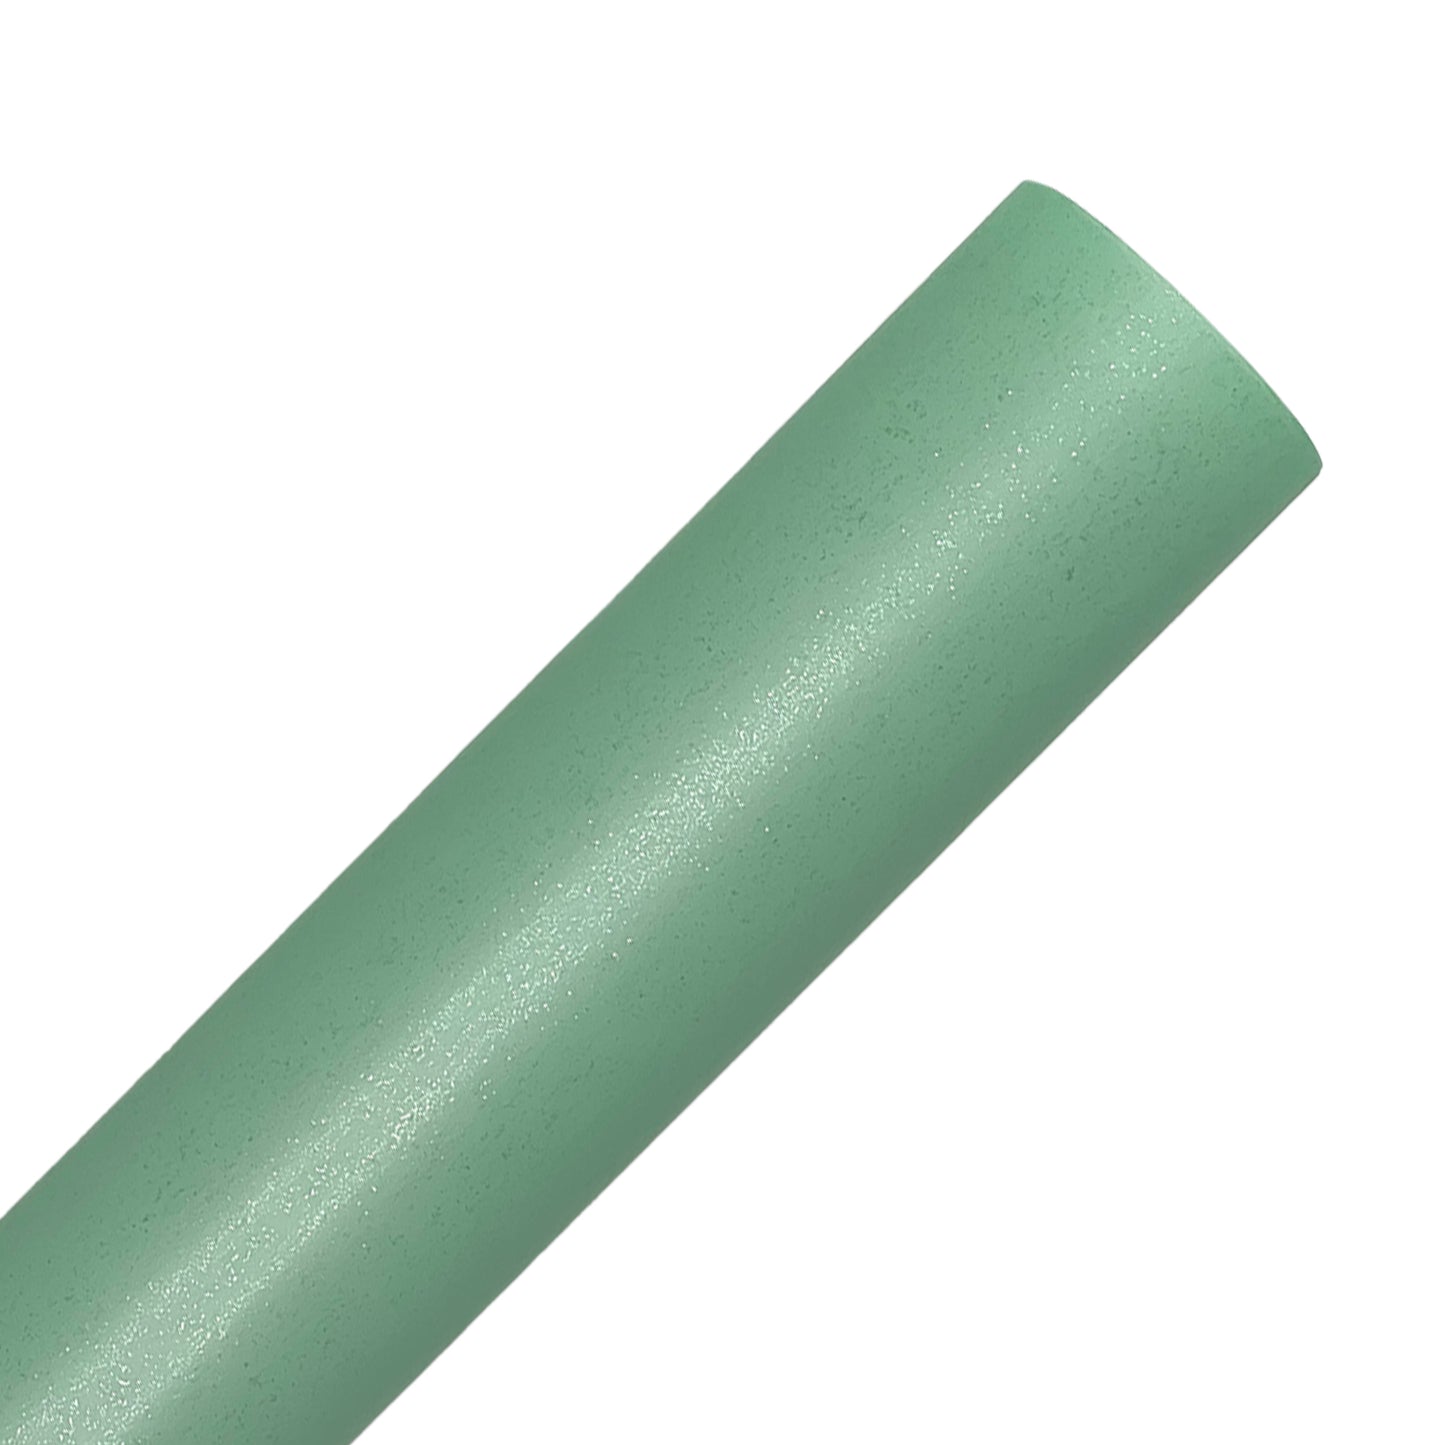 Green Etched Glass Adhesive Vinyl Rolls By Craftables